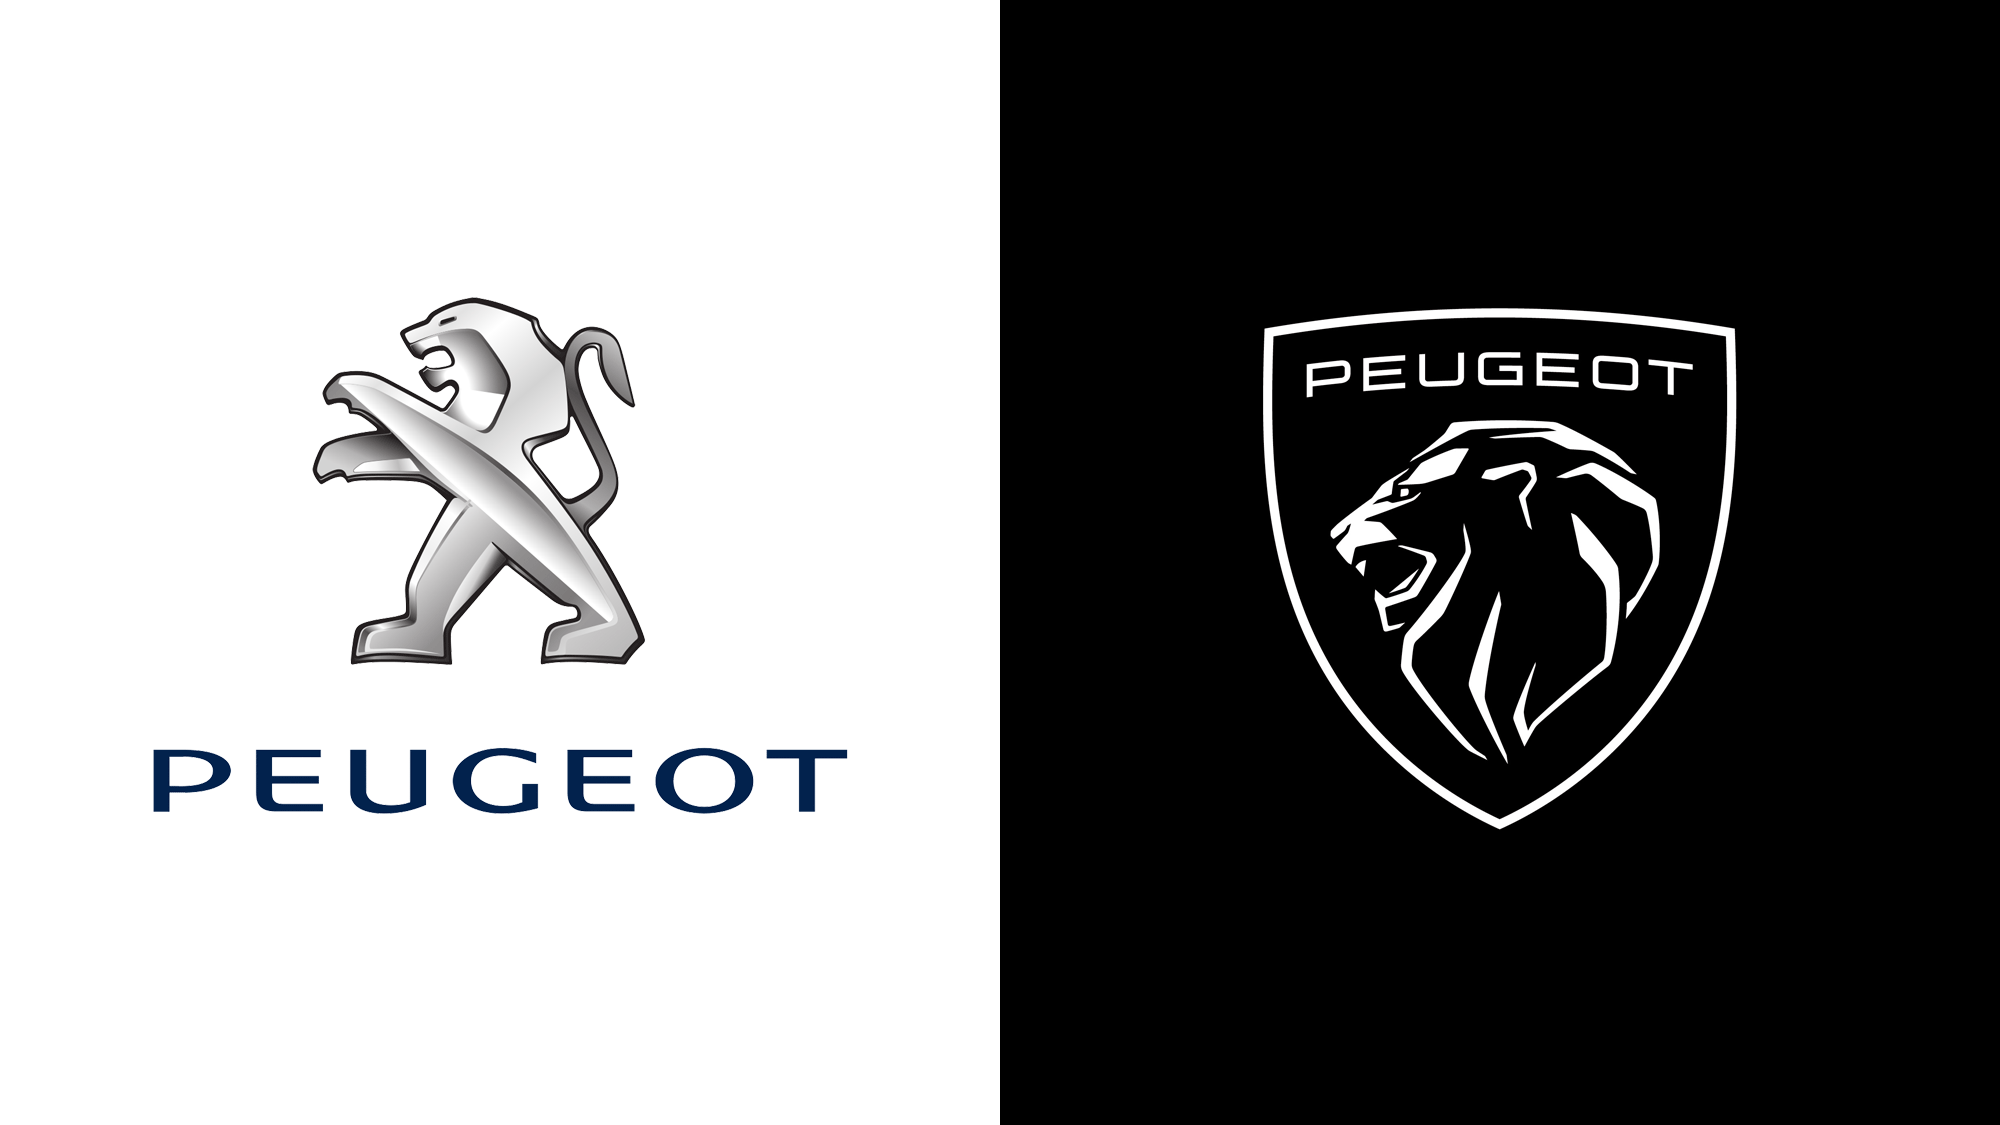 New Logo and Identity for Peugeot by Peugeot Design Lab and W